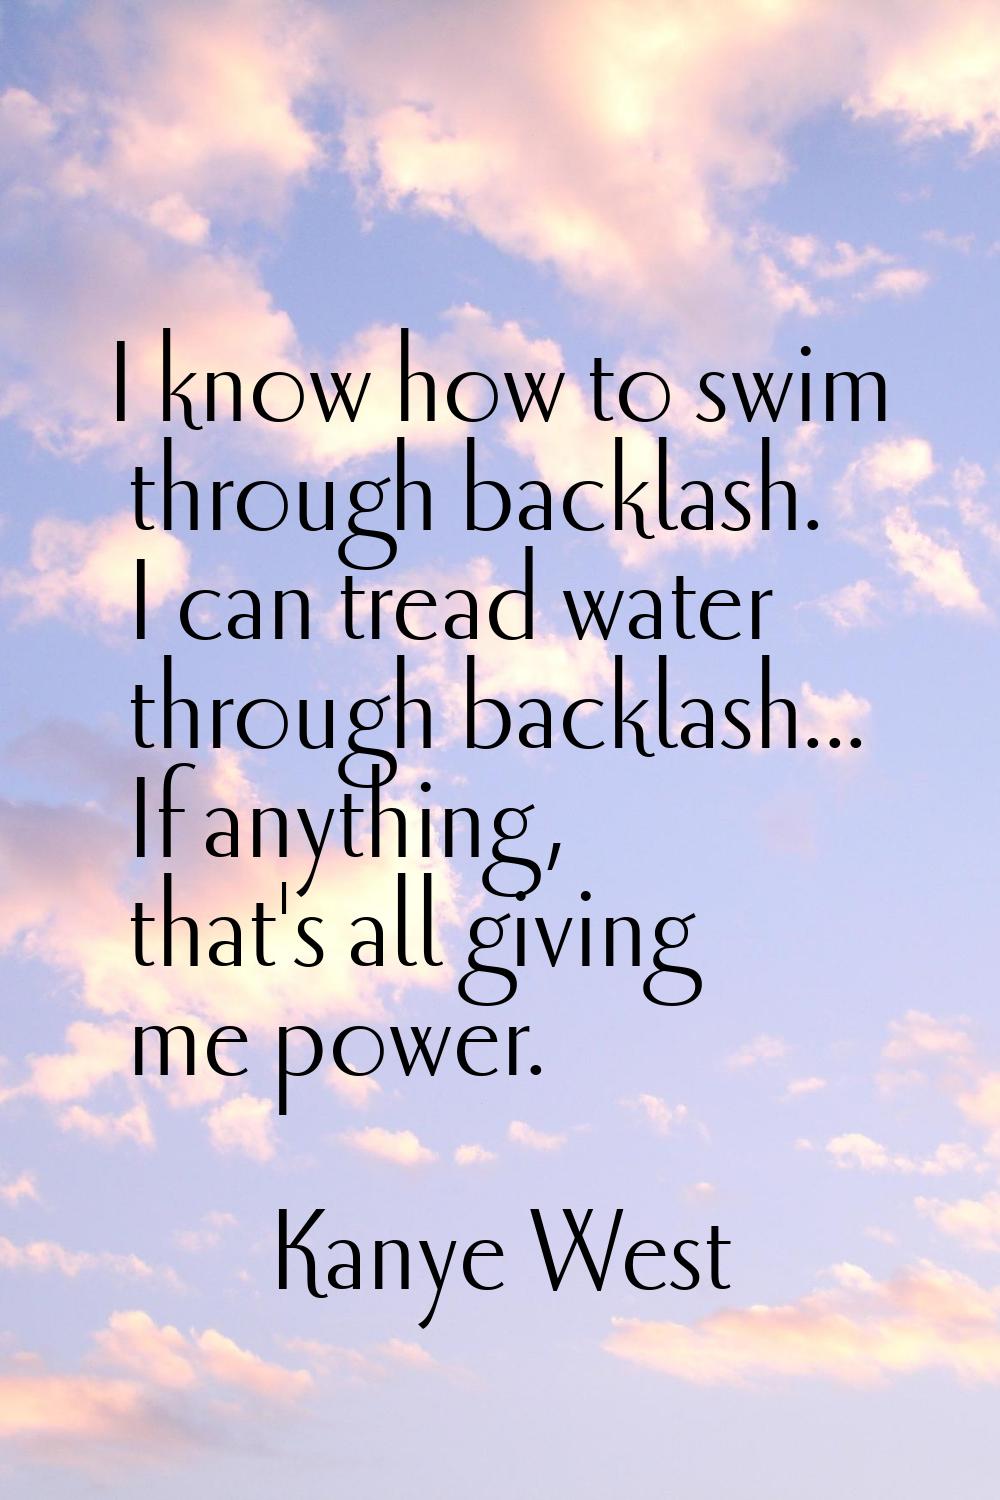 I know how to swim through backlash. I can tread water through backlash... If anything, that's all 